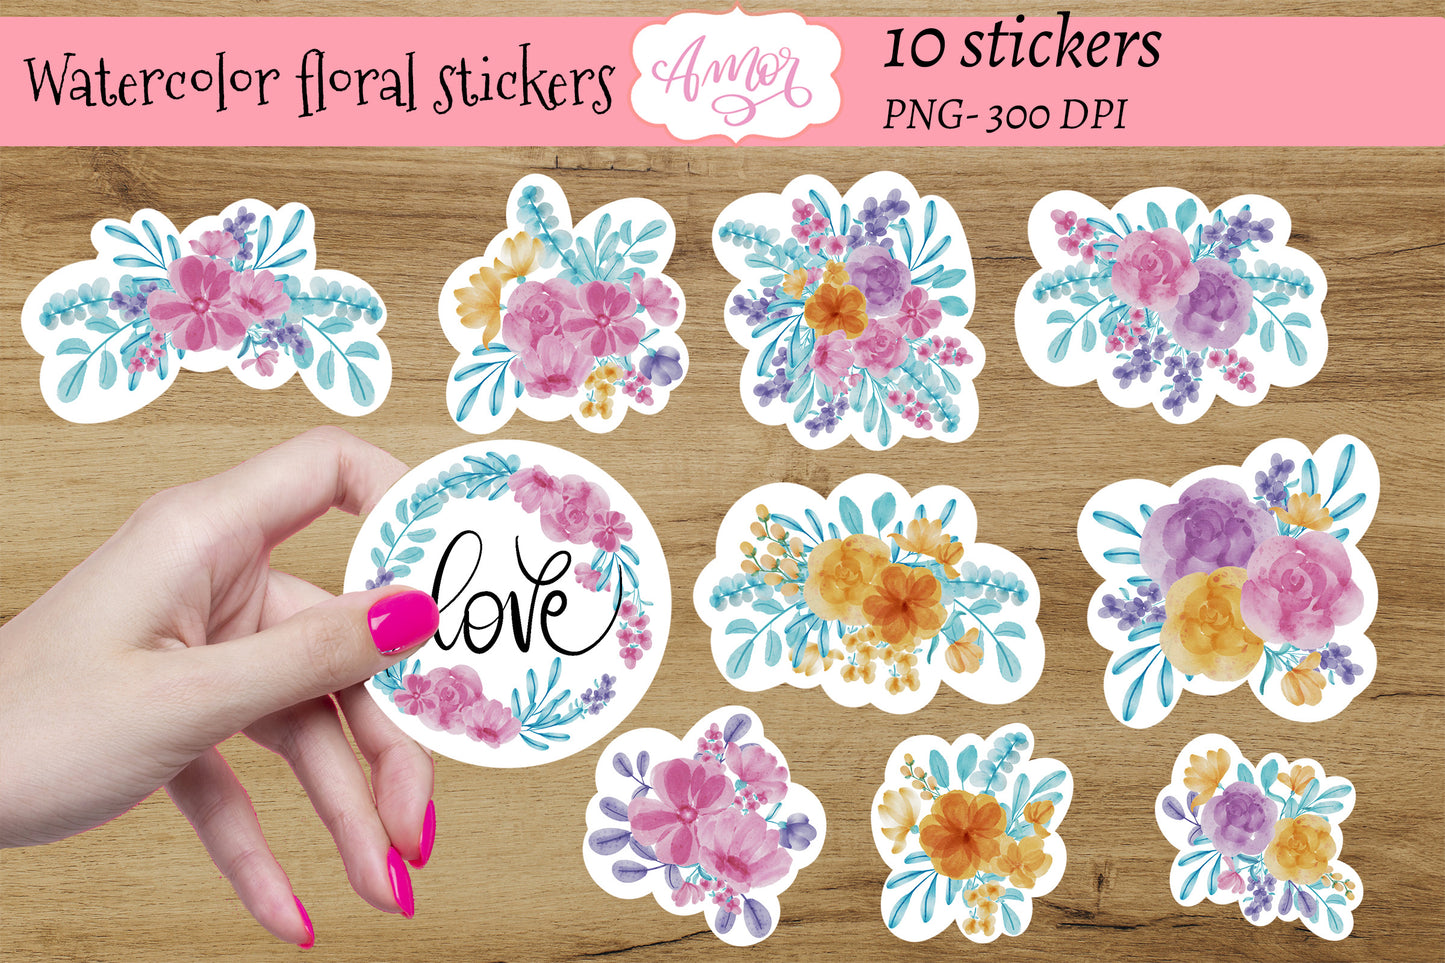 Watercolor Floral Stickers for print then cut